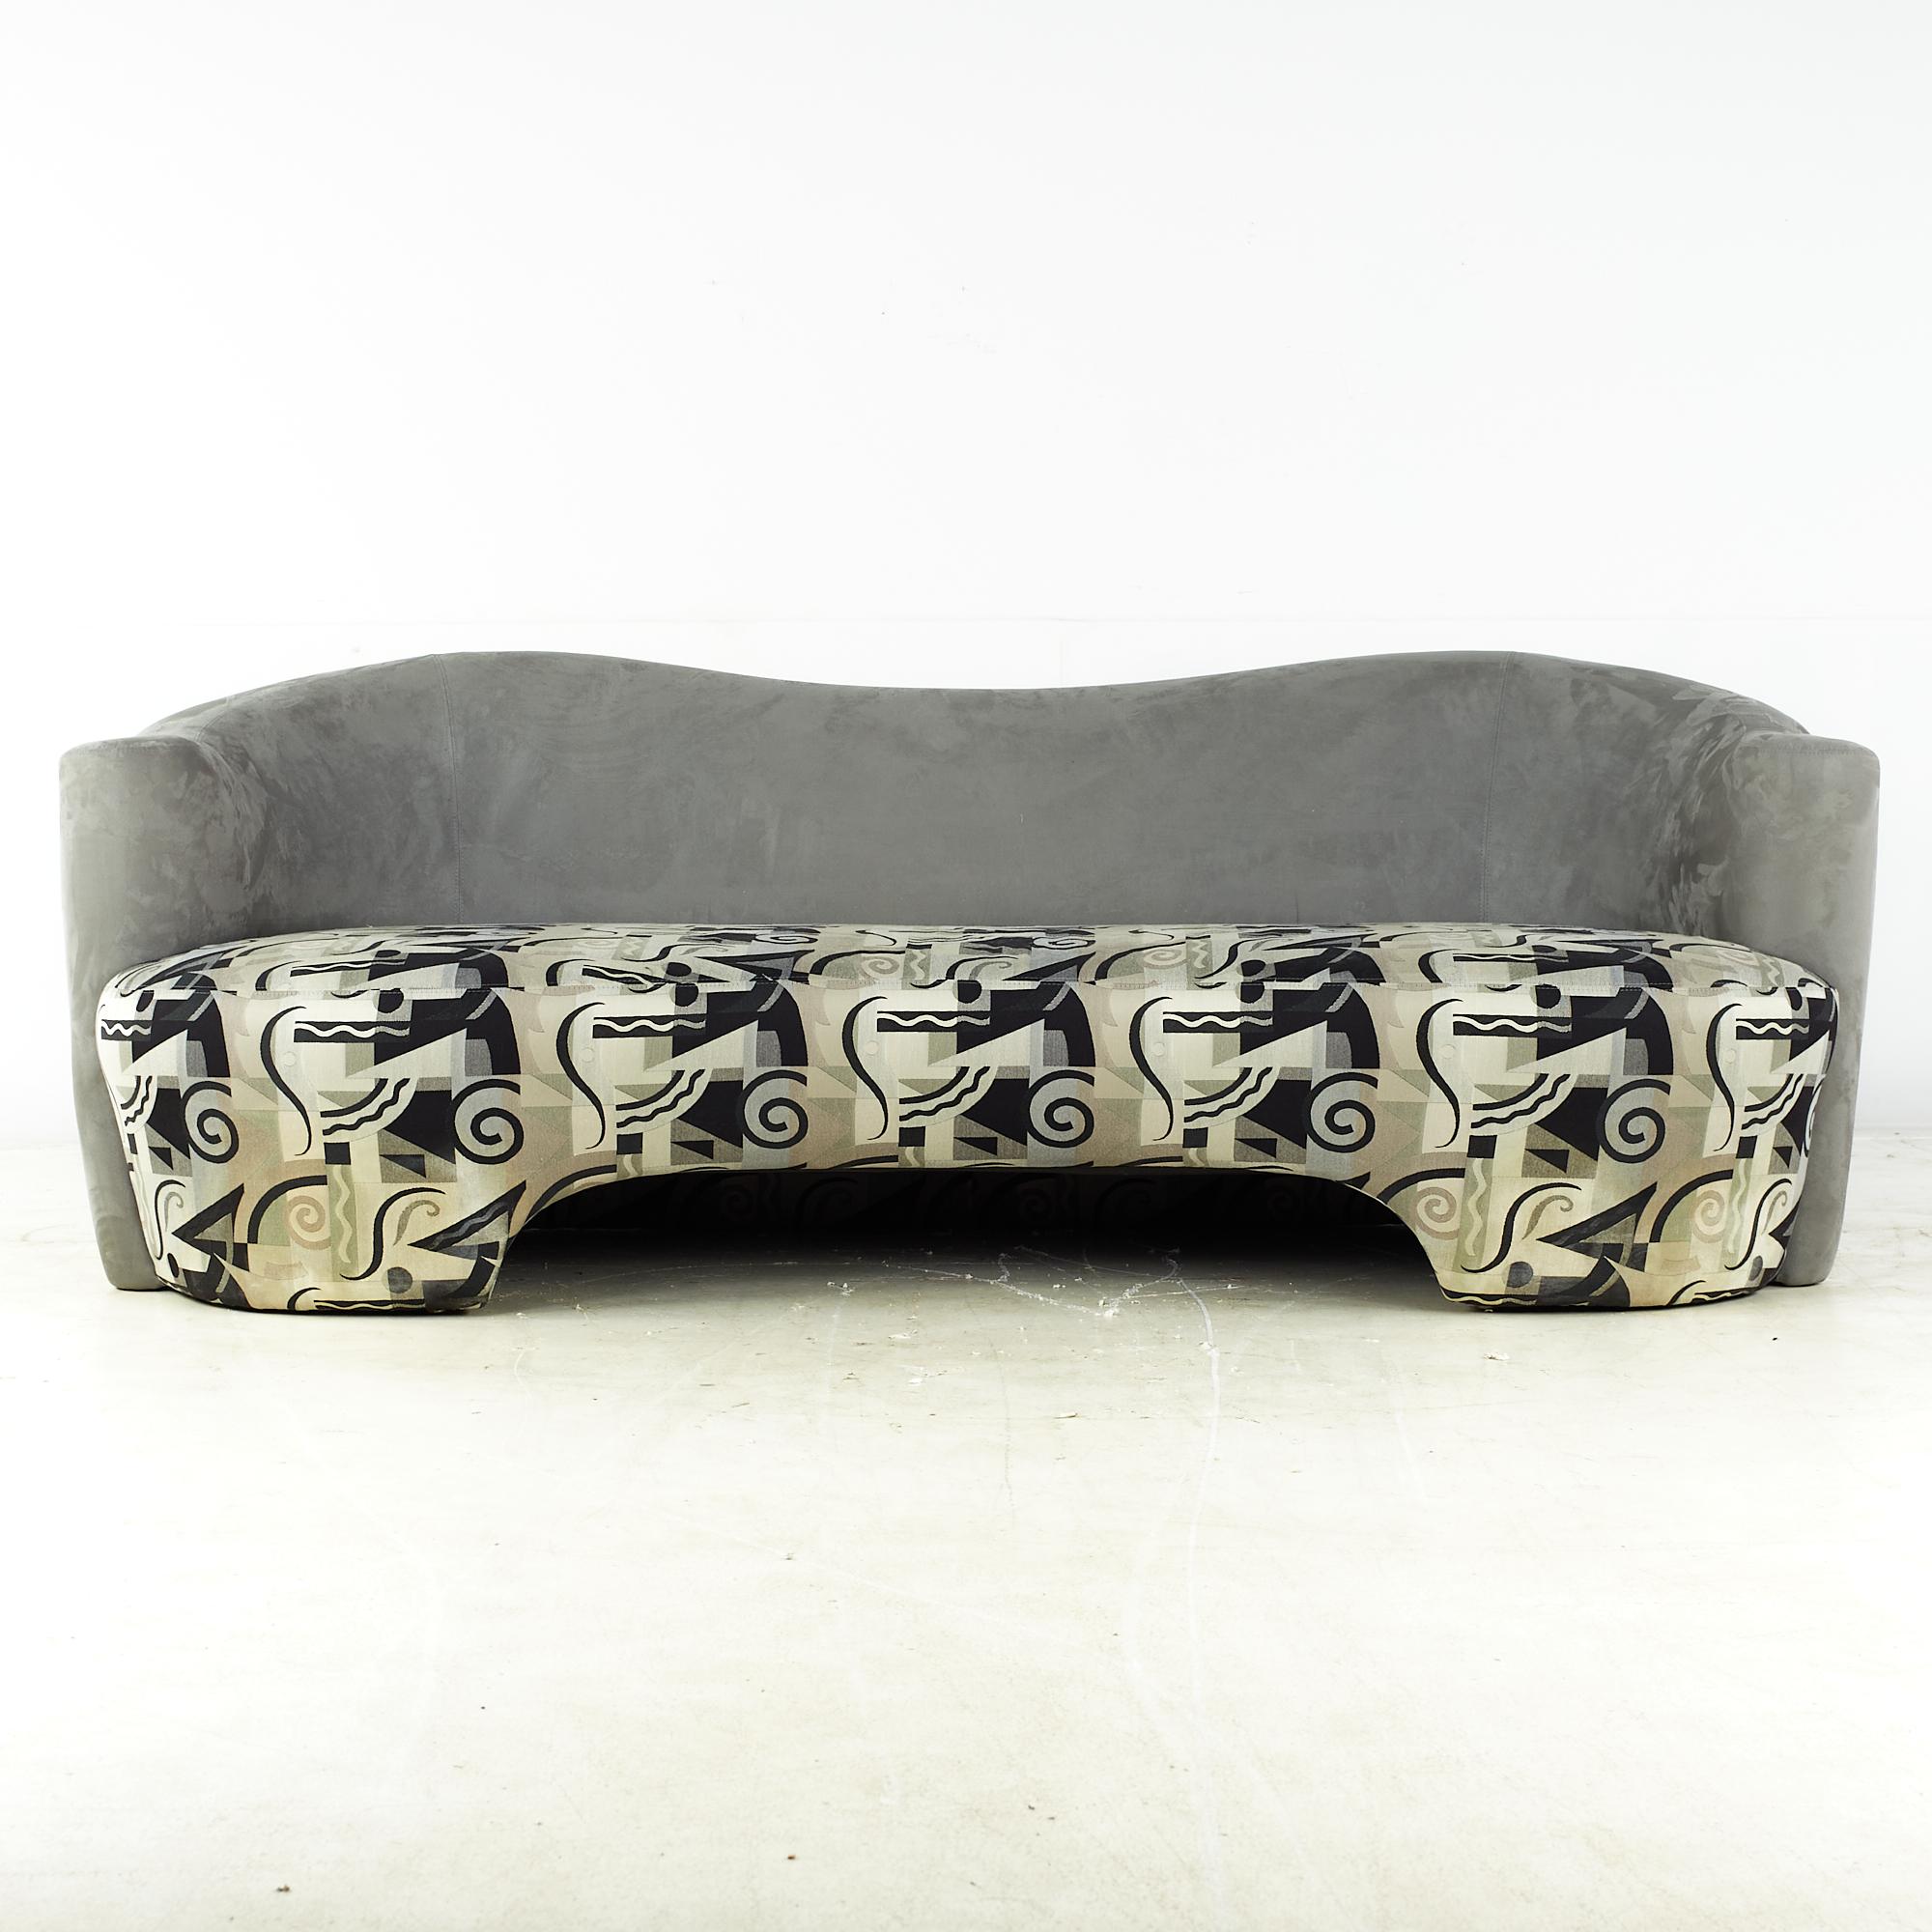 Vladimir Kagan Style Weiman midcentury sculptural curved sofa

This sofa measures: 93 wide x 43 deep x 33 inches high, with a seat height of 17 and an arm height of 28 inches

All pieces of furniture can be had in what we call restored vintage